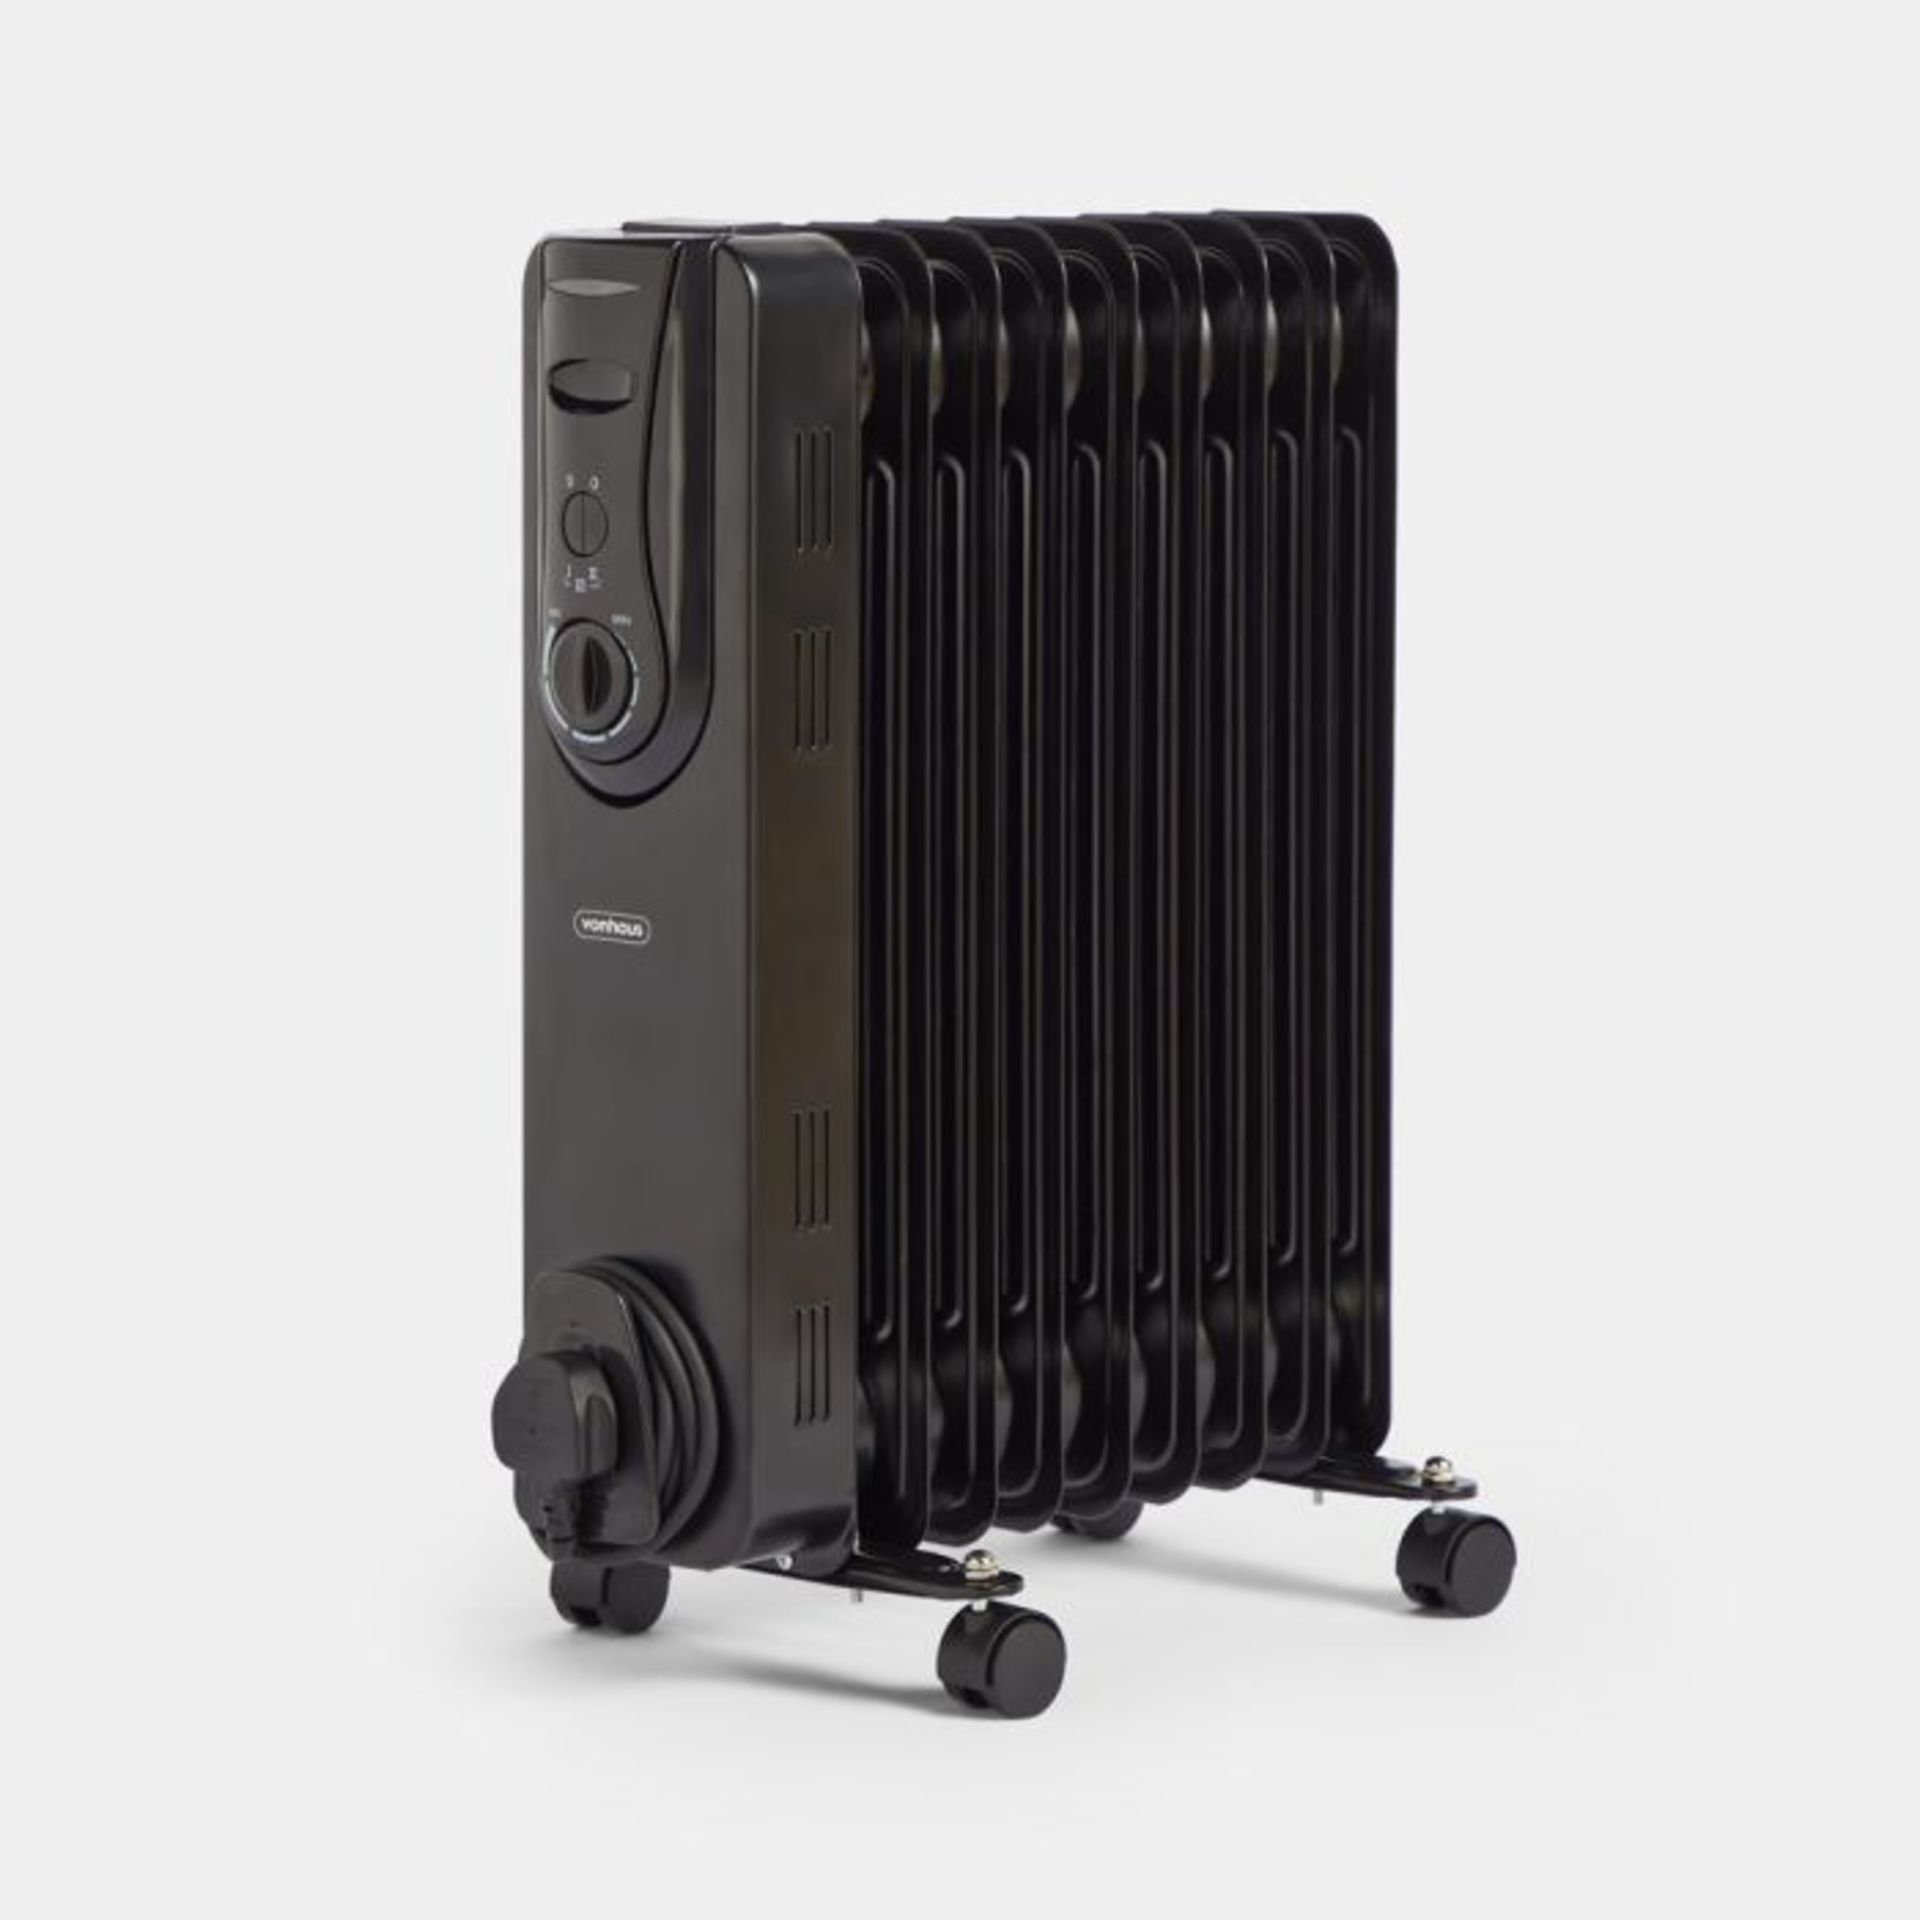 9 Fin 2000W Oil Filled Radiator - Black. - ER46. Features 9 oil-filled fins to effectively heat